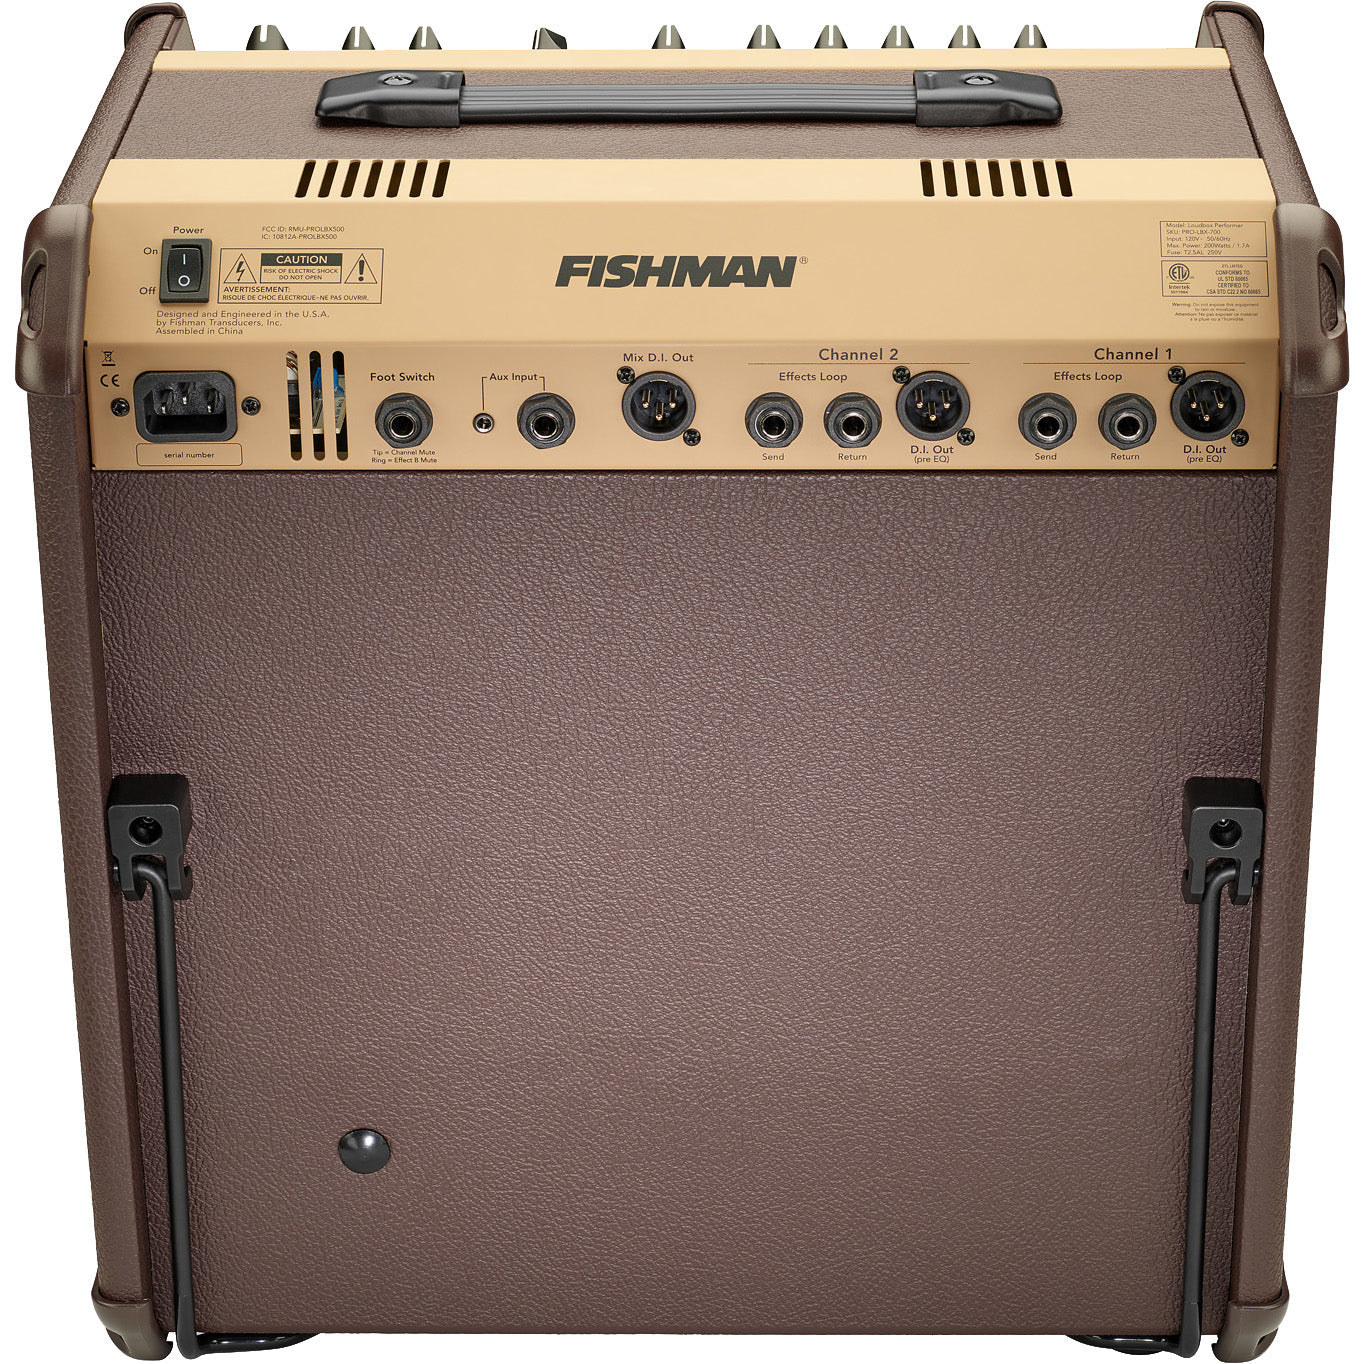 Fishman Loudbox Performer Acoustic Combo Amplifier with Bluetooth